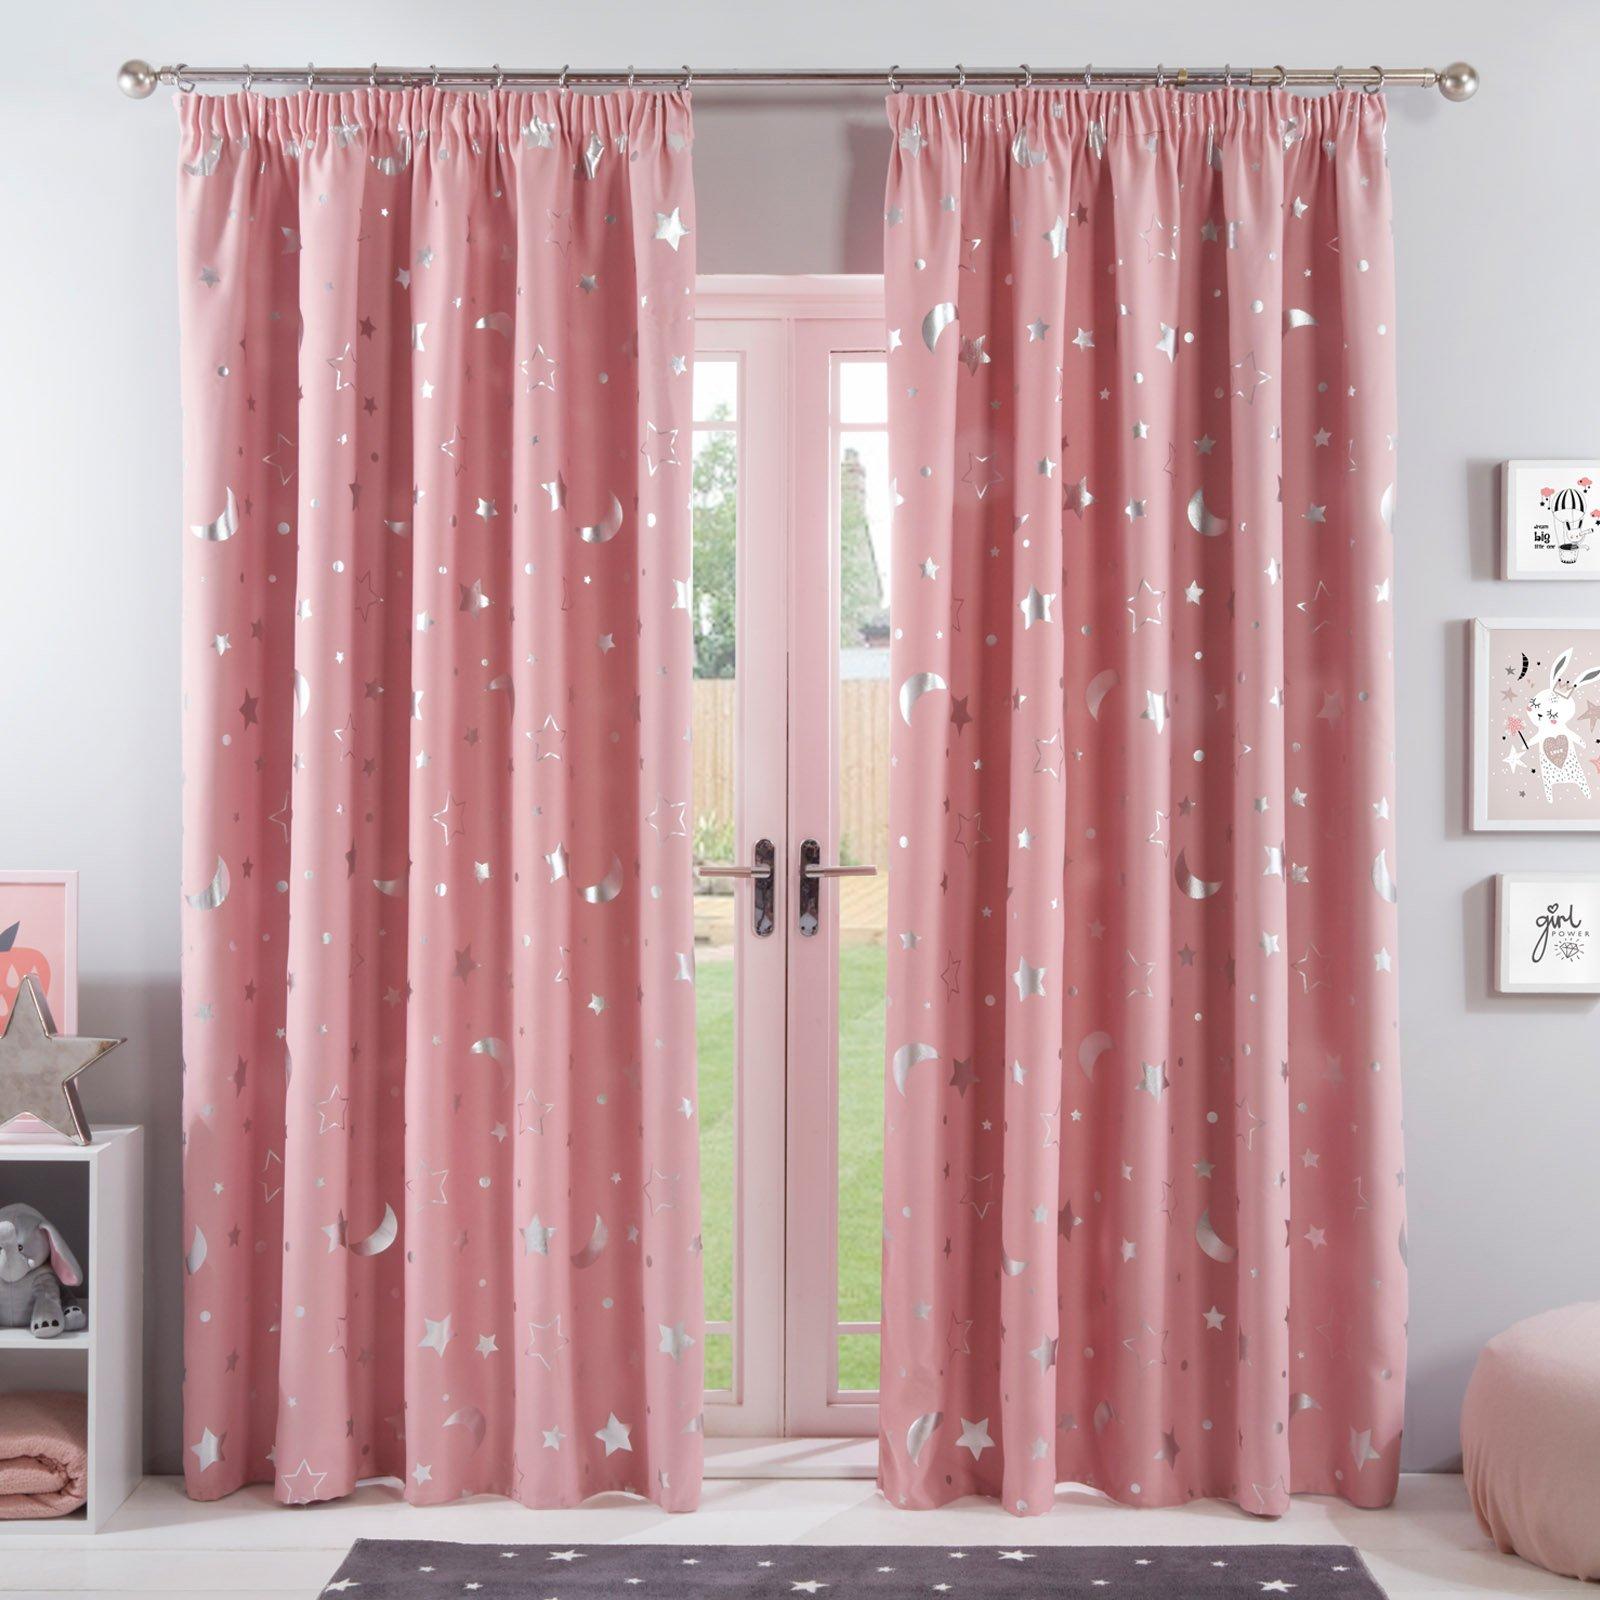 Pair of Galaxy Star Pencil Pleat Blackout Curtains